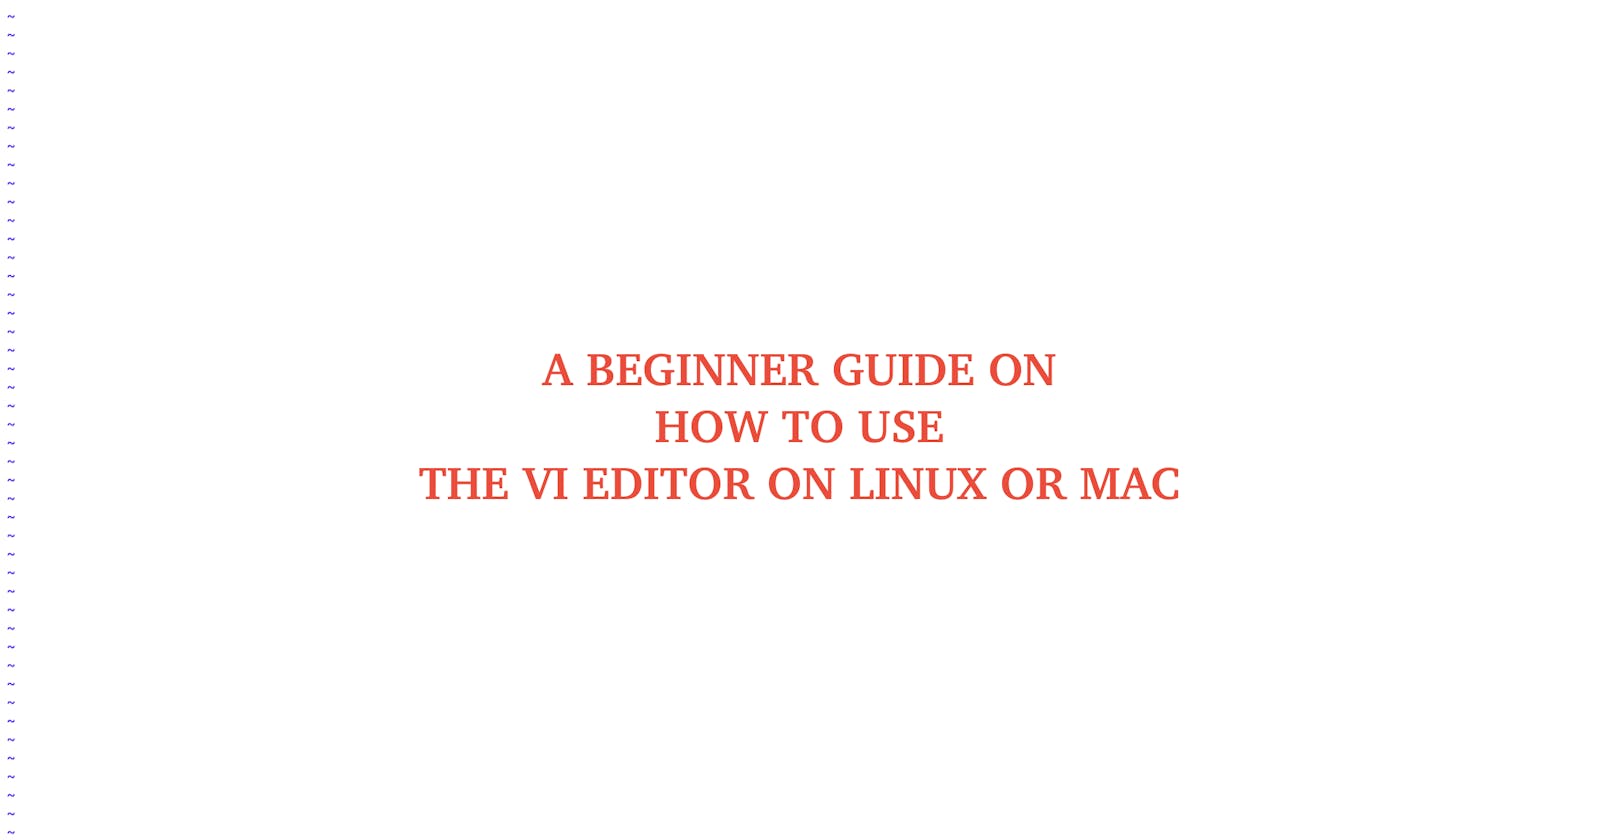 A Beginner Guide on How To Use the Vi Text Editor on Linux or Mac